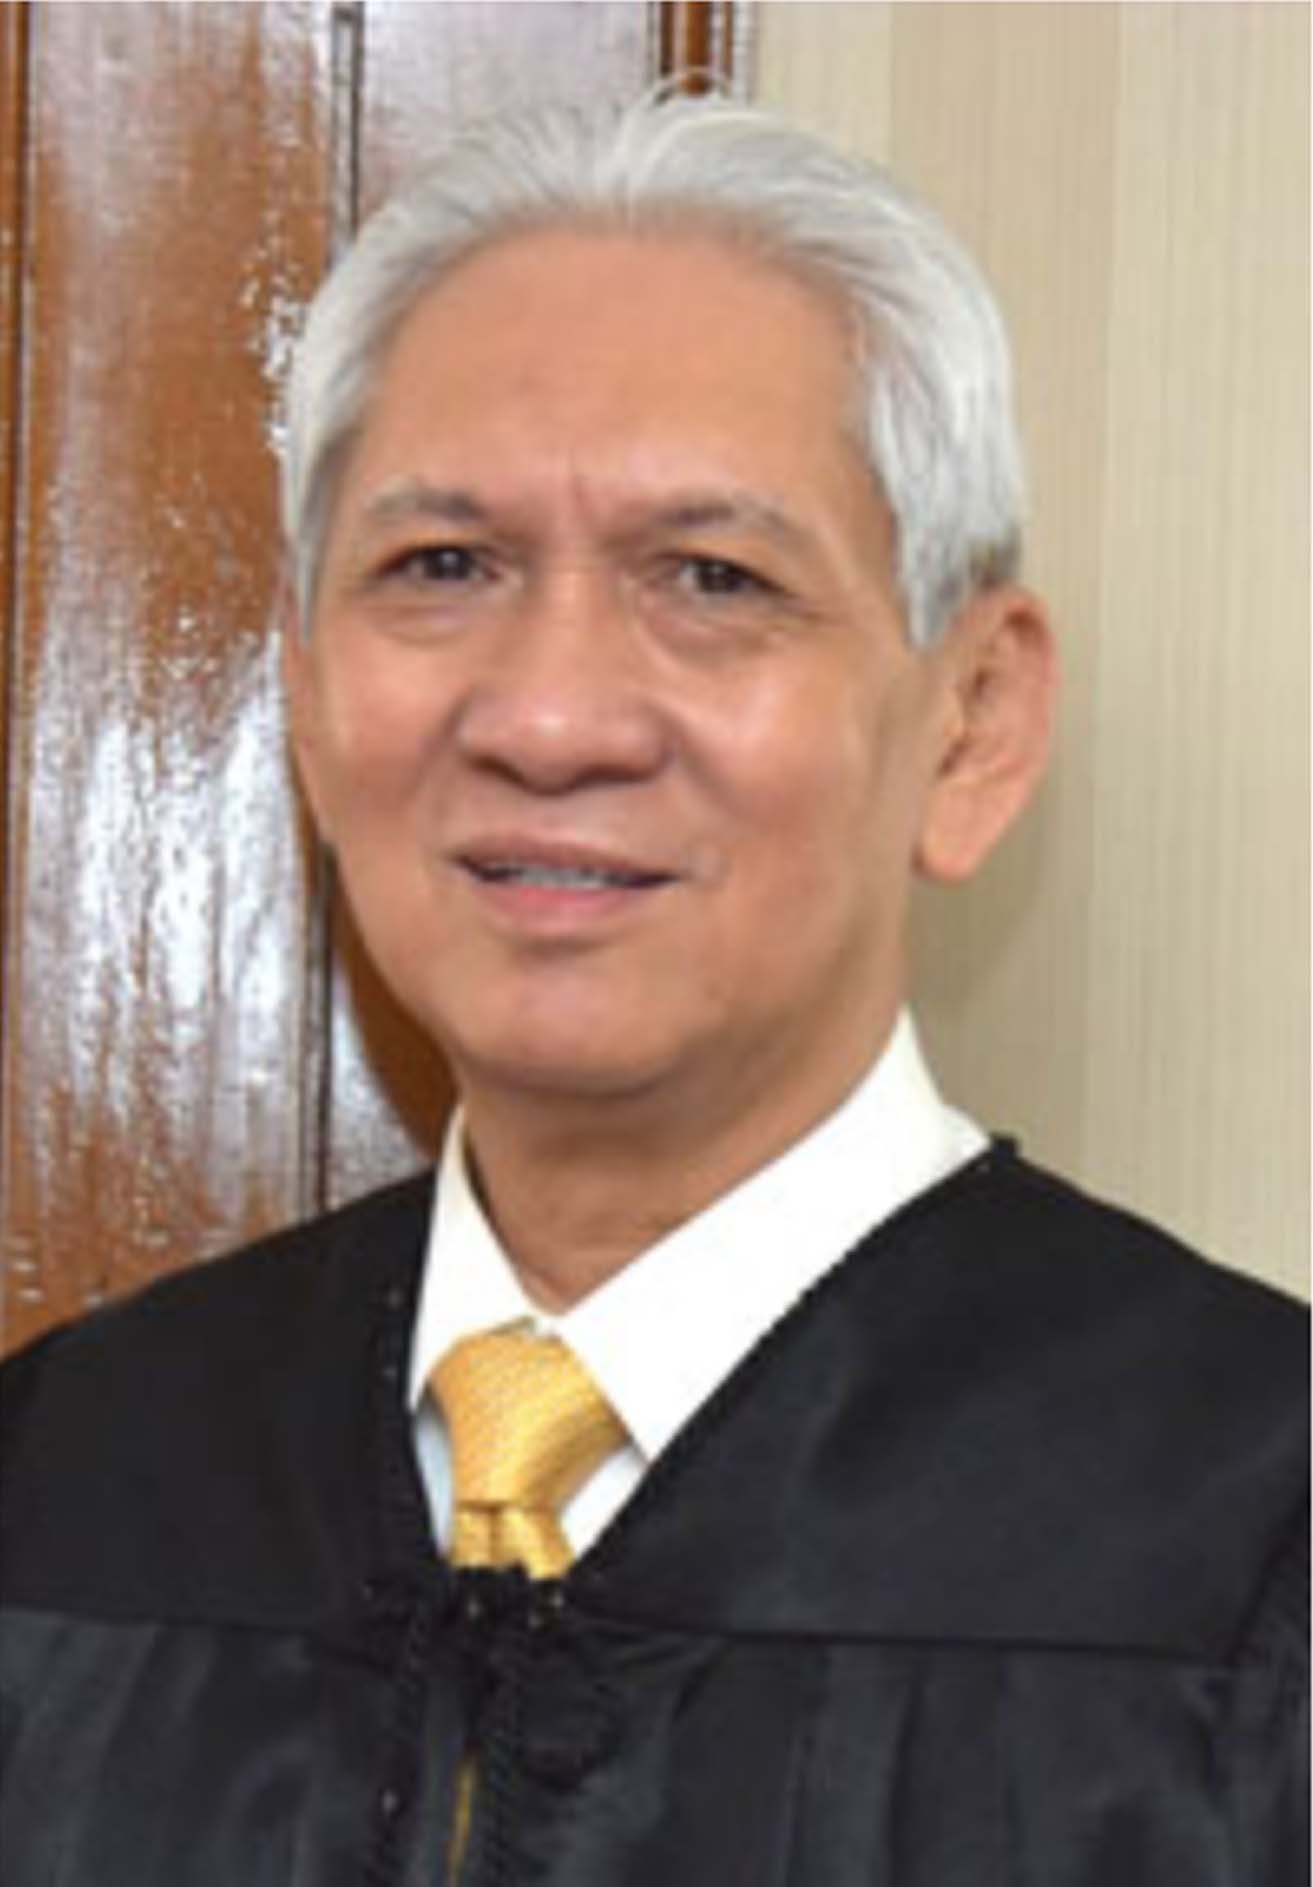 Associate Justice Martires not fit to be Ombudsman, group tells JBC